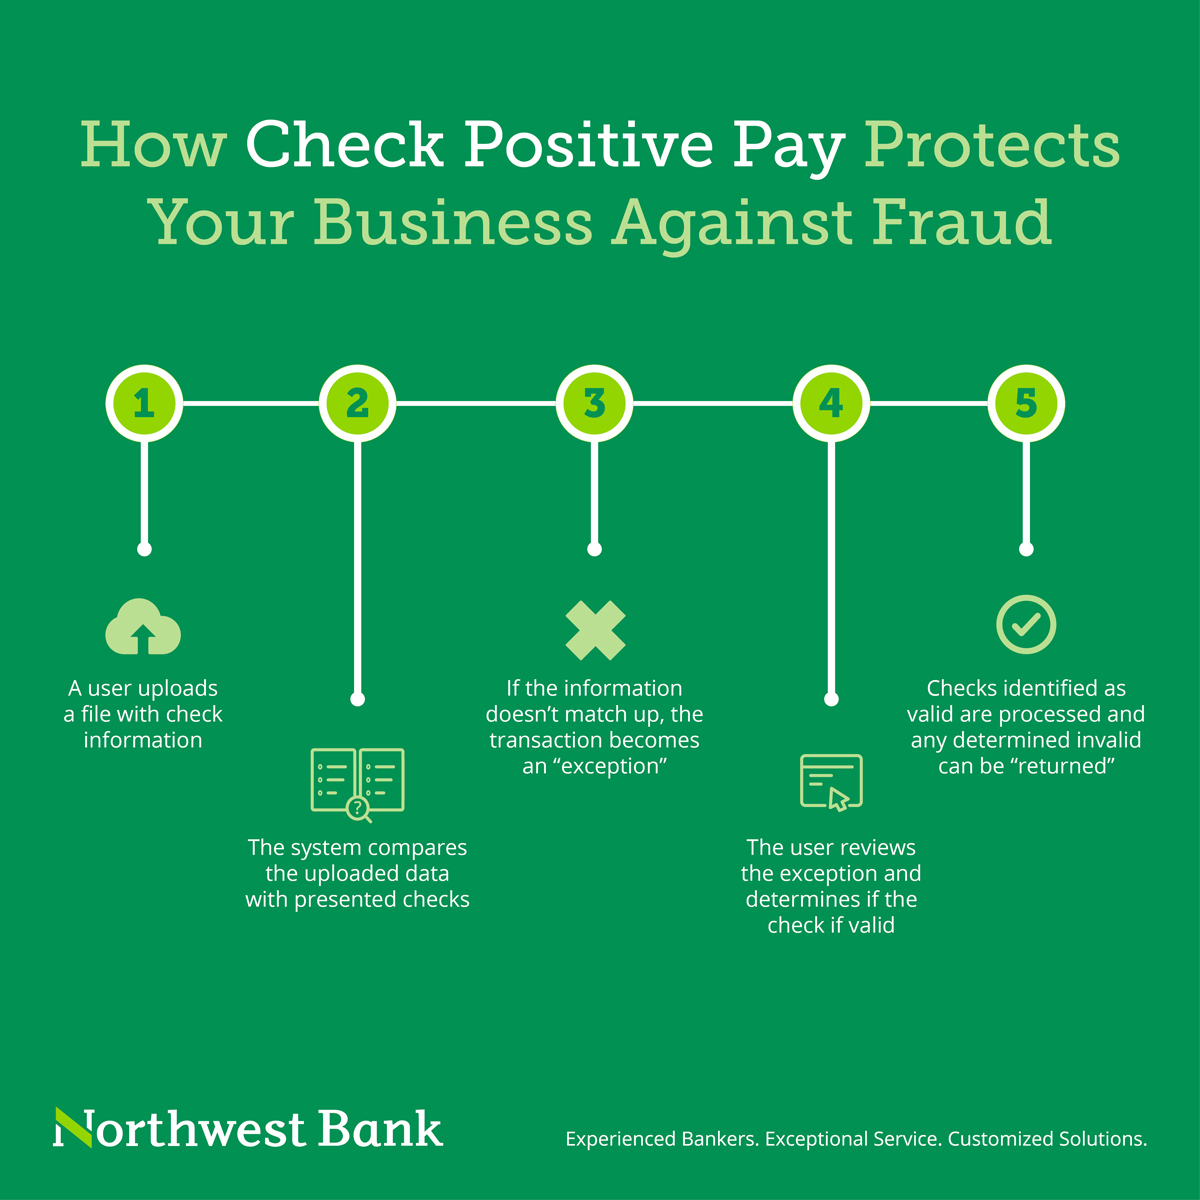 Chart graphically illustrating the steps for how Check Positive Pay protects a business against fraud